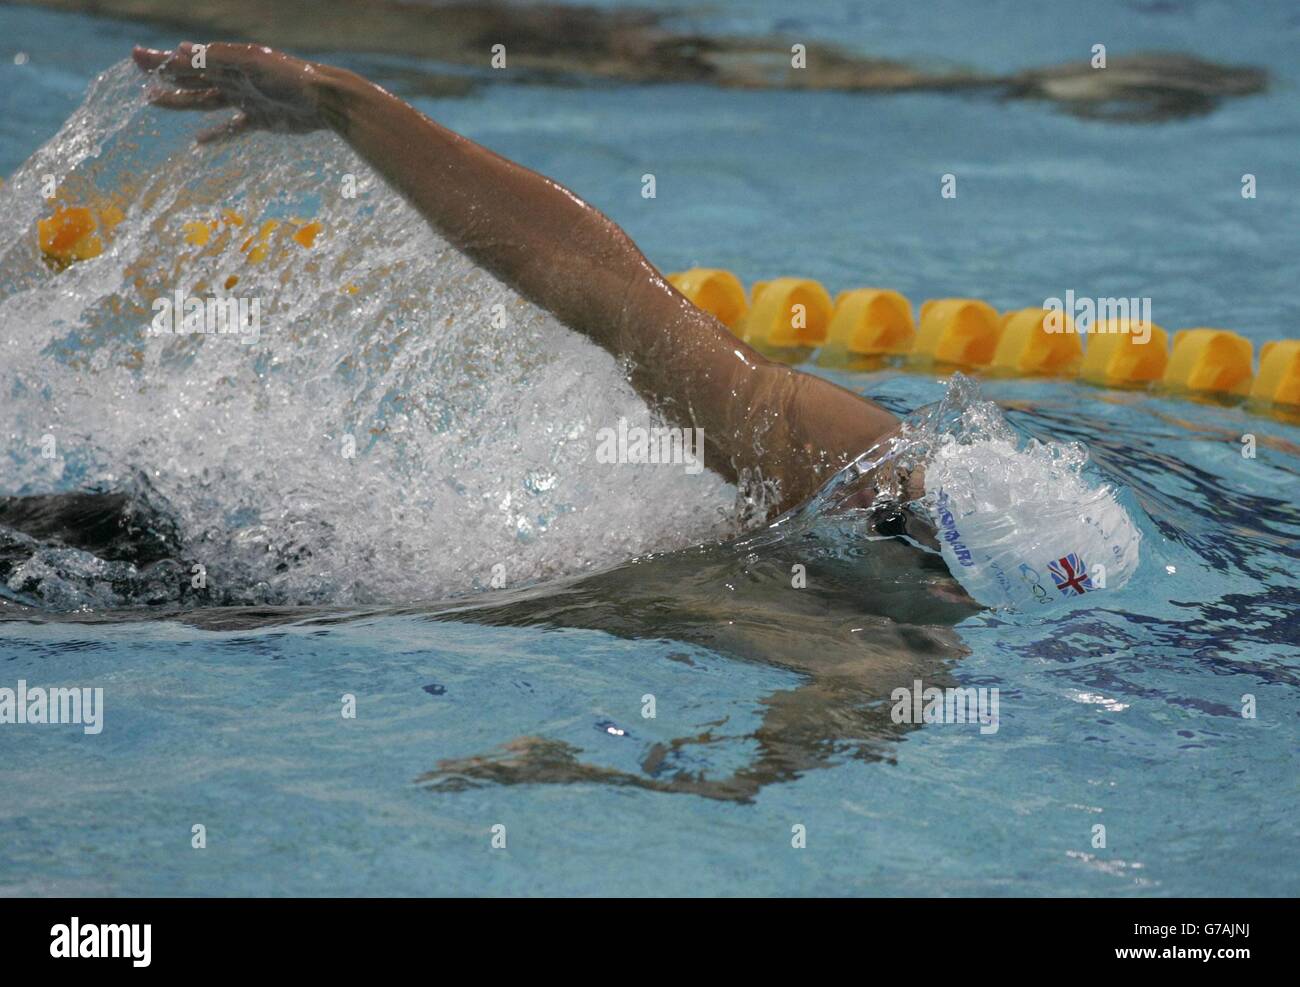 British swimmer James Goddard from Manchester on his way to winning the semi final of the Men's 200m Backstroke at the Olympic Aquatic Centre in Athens, Greece. Stock Photo